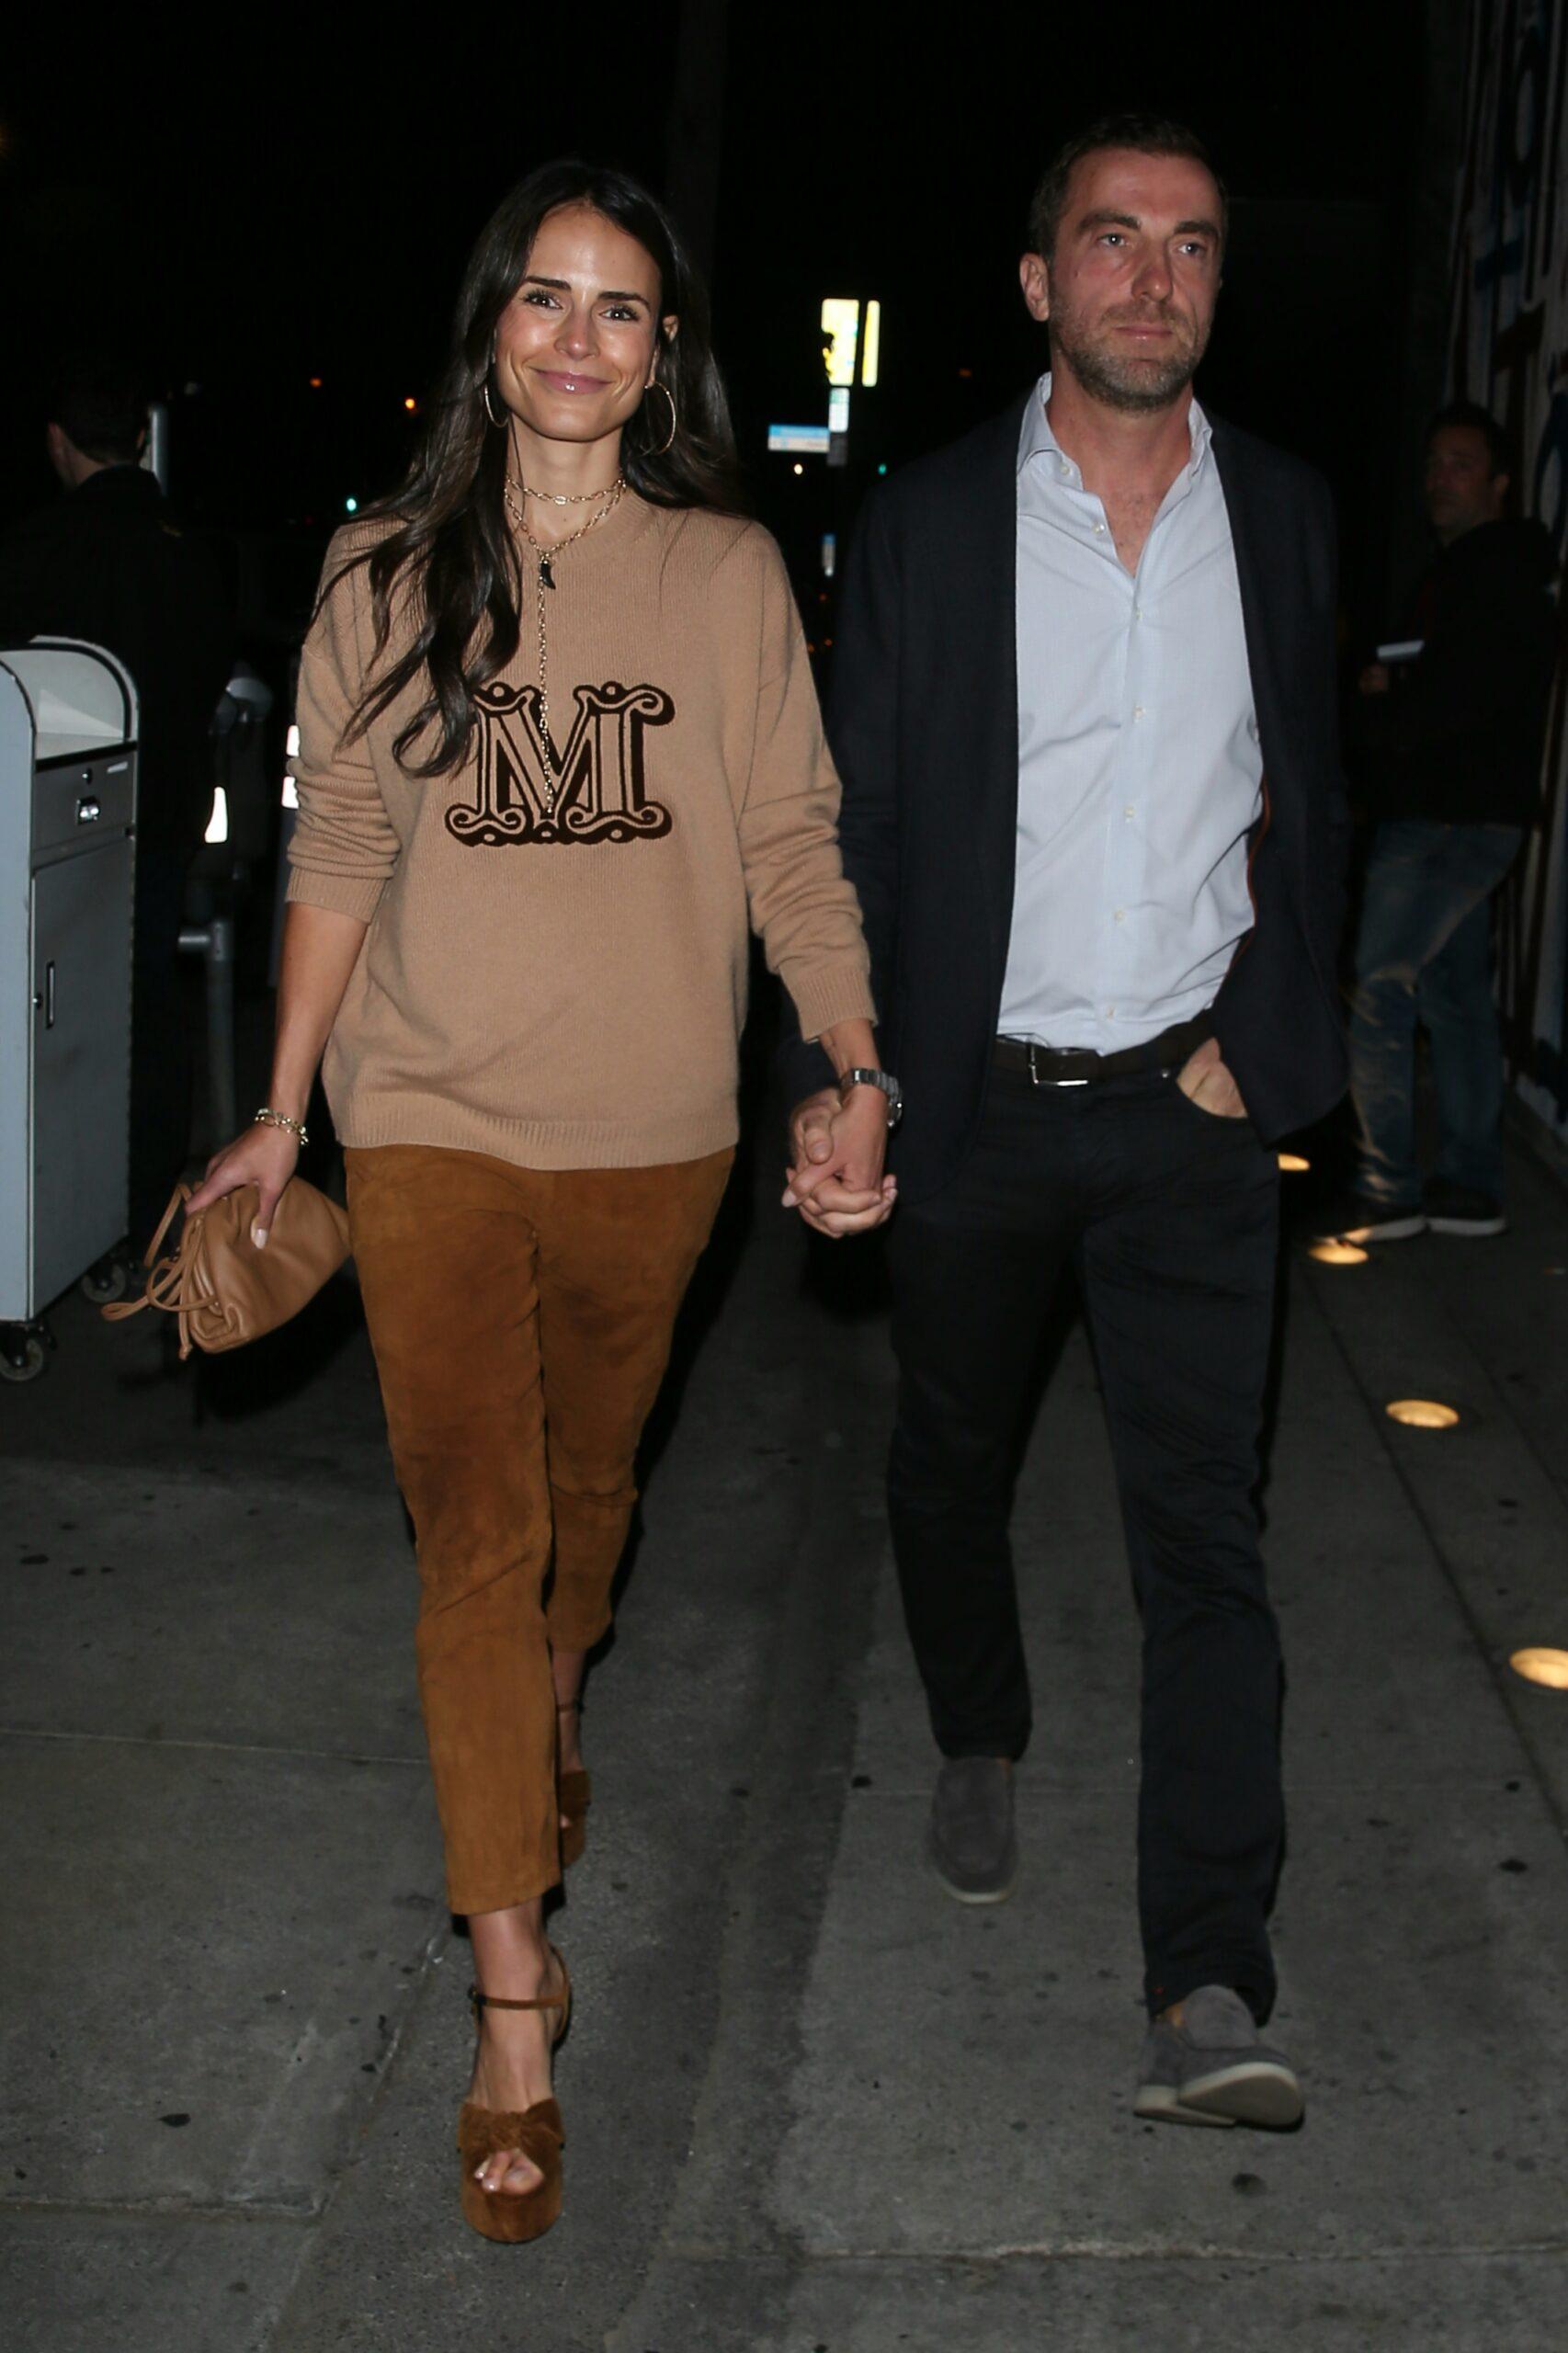 Jordana Brewster and her boyfriend holding hands arriving for dinner at Craig apos s in West Hollywood